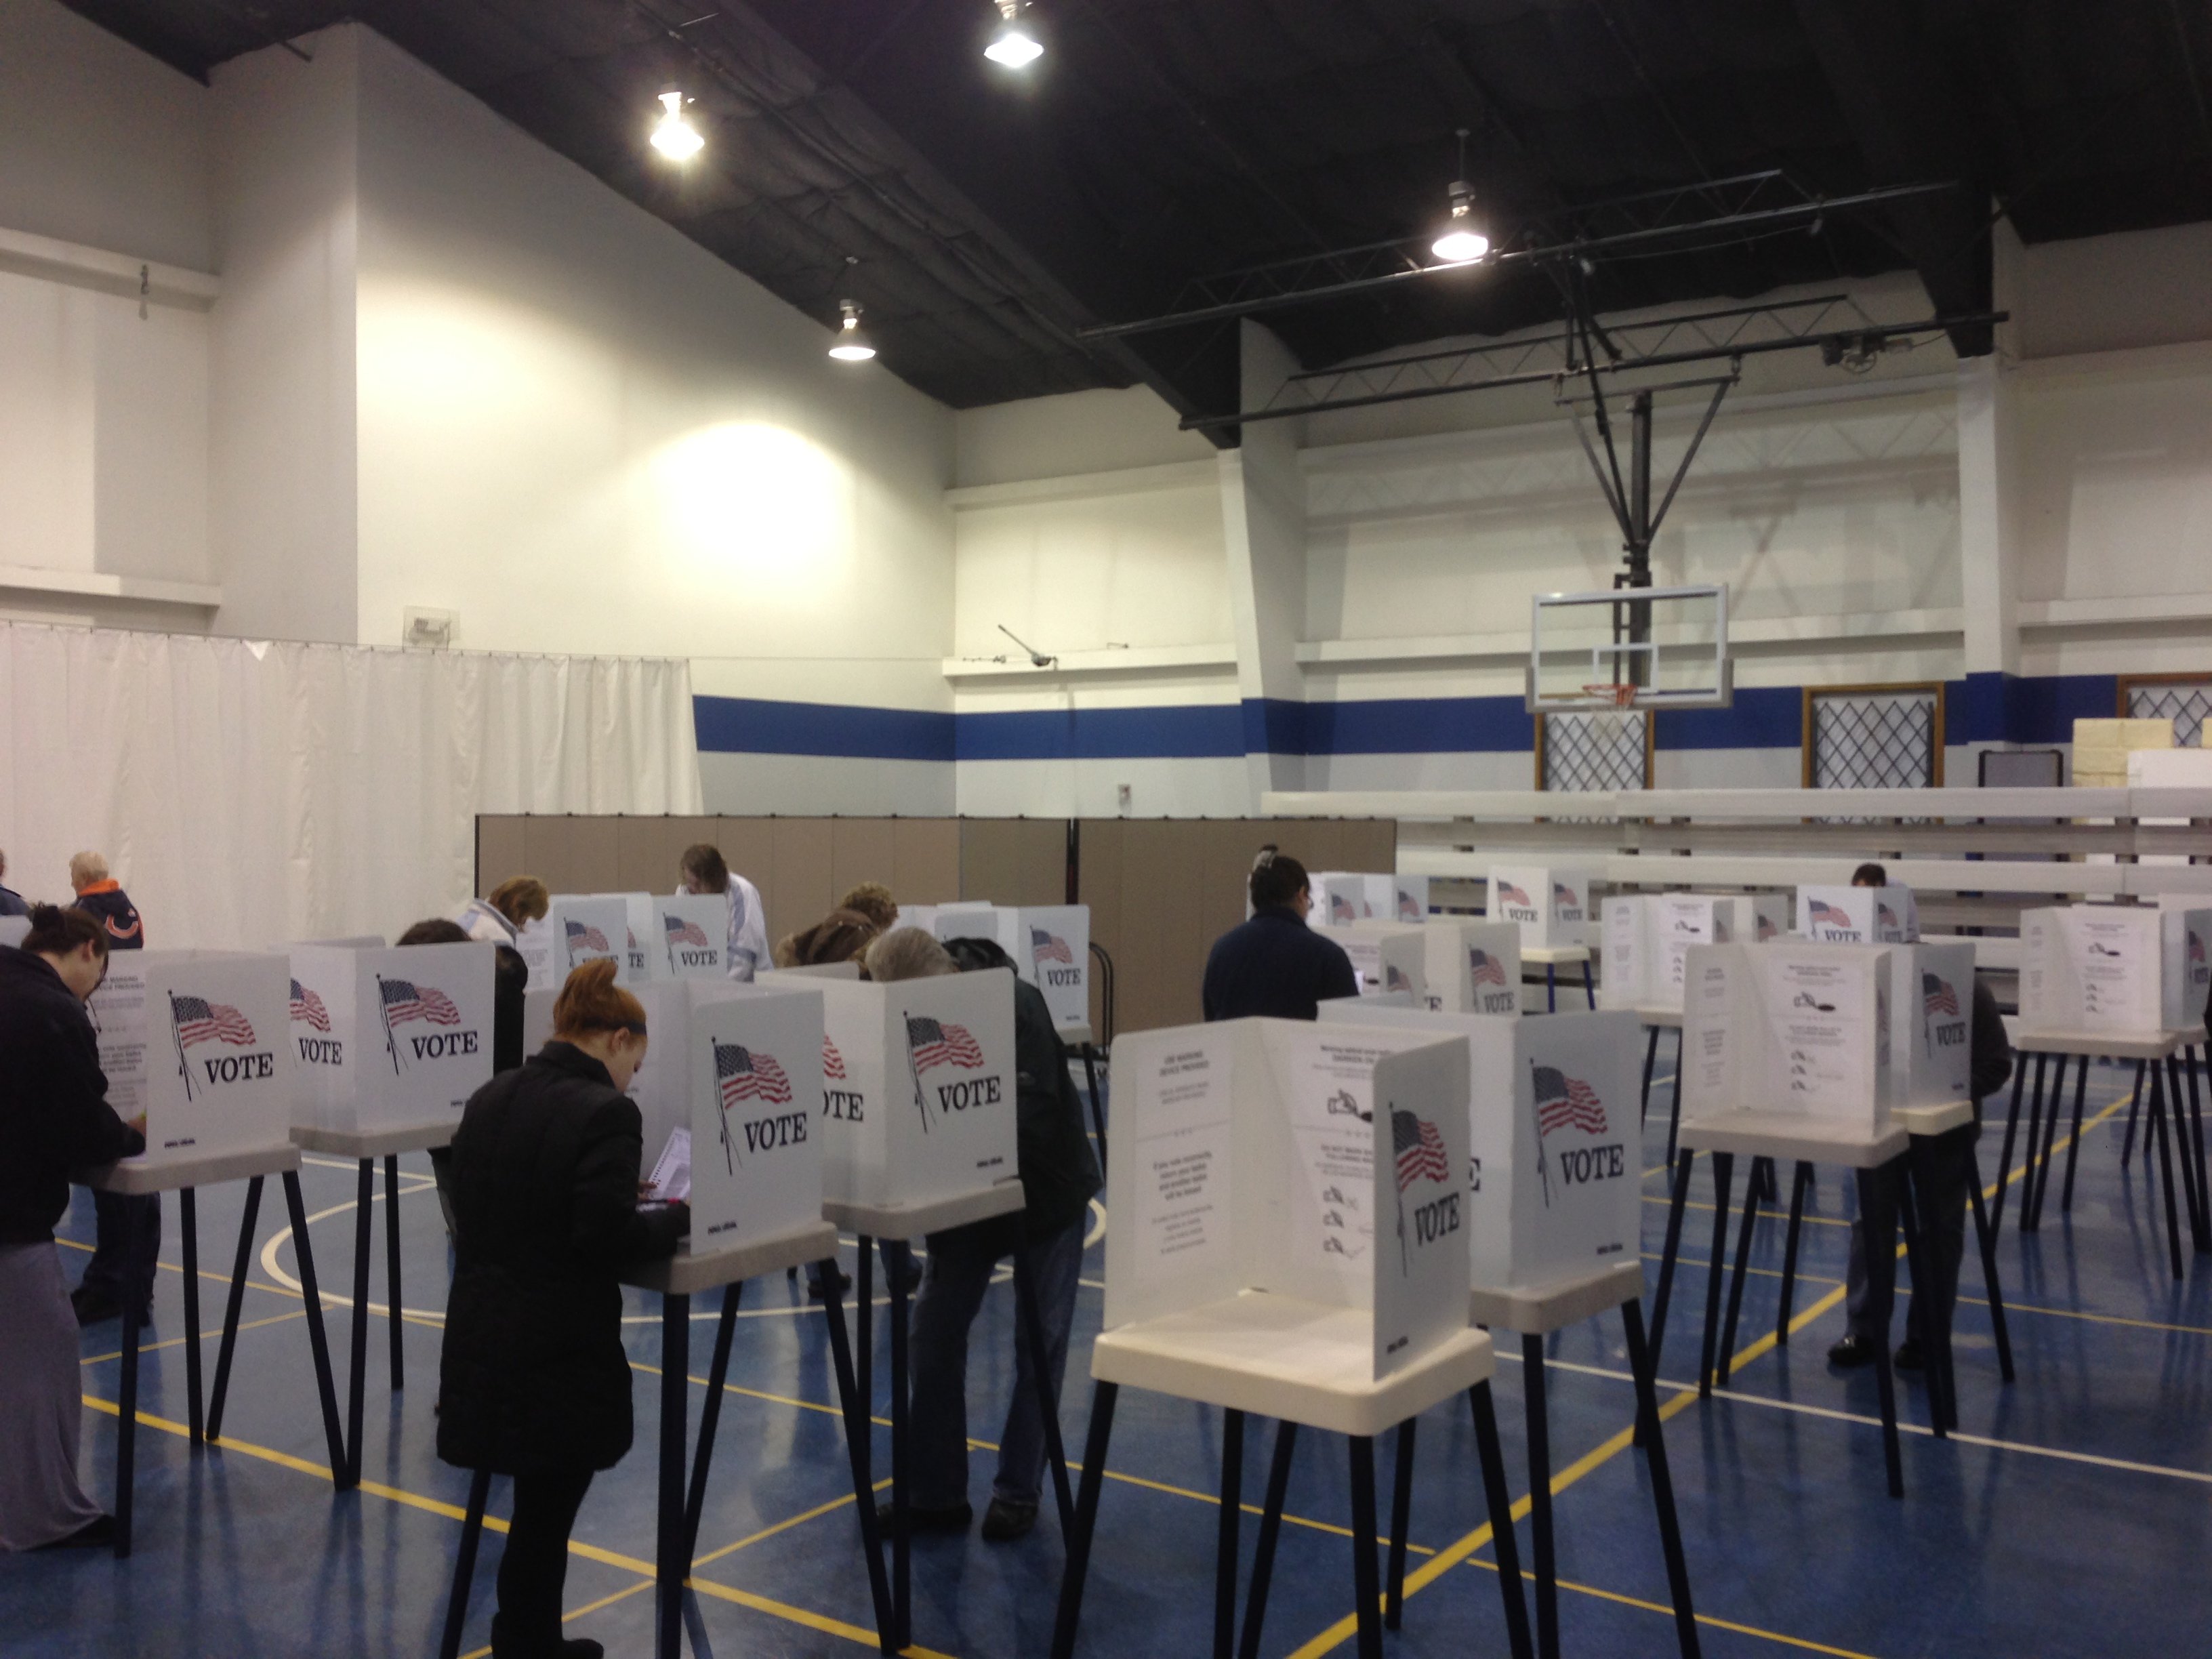 Rows of voting booths in a gym on election day